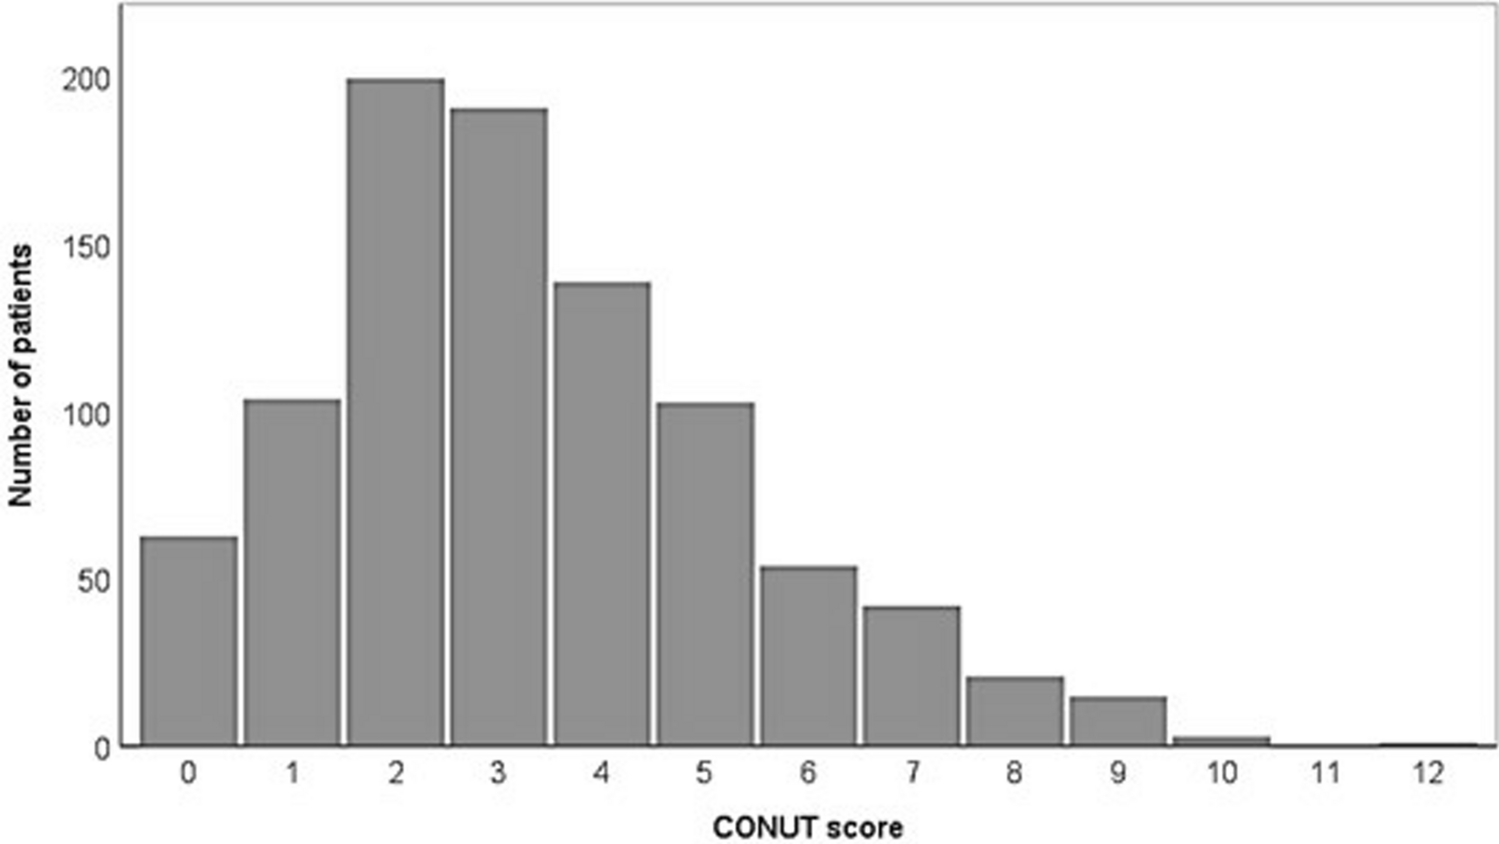 Controlling Nutritional Status (CONUT) Score is Associated with Overall Survival in Patients with Hepatocellular Carcinoma Treated with Conventional Transcatheter Arterial Chemoembolization: A Propensity Score Matched Analysis